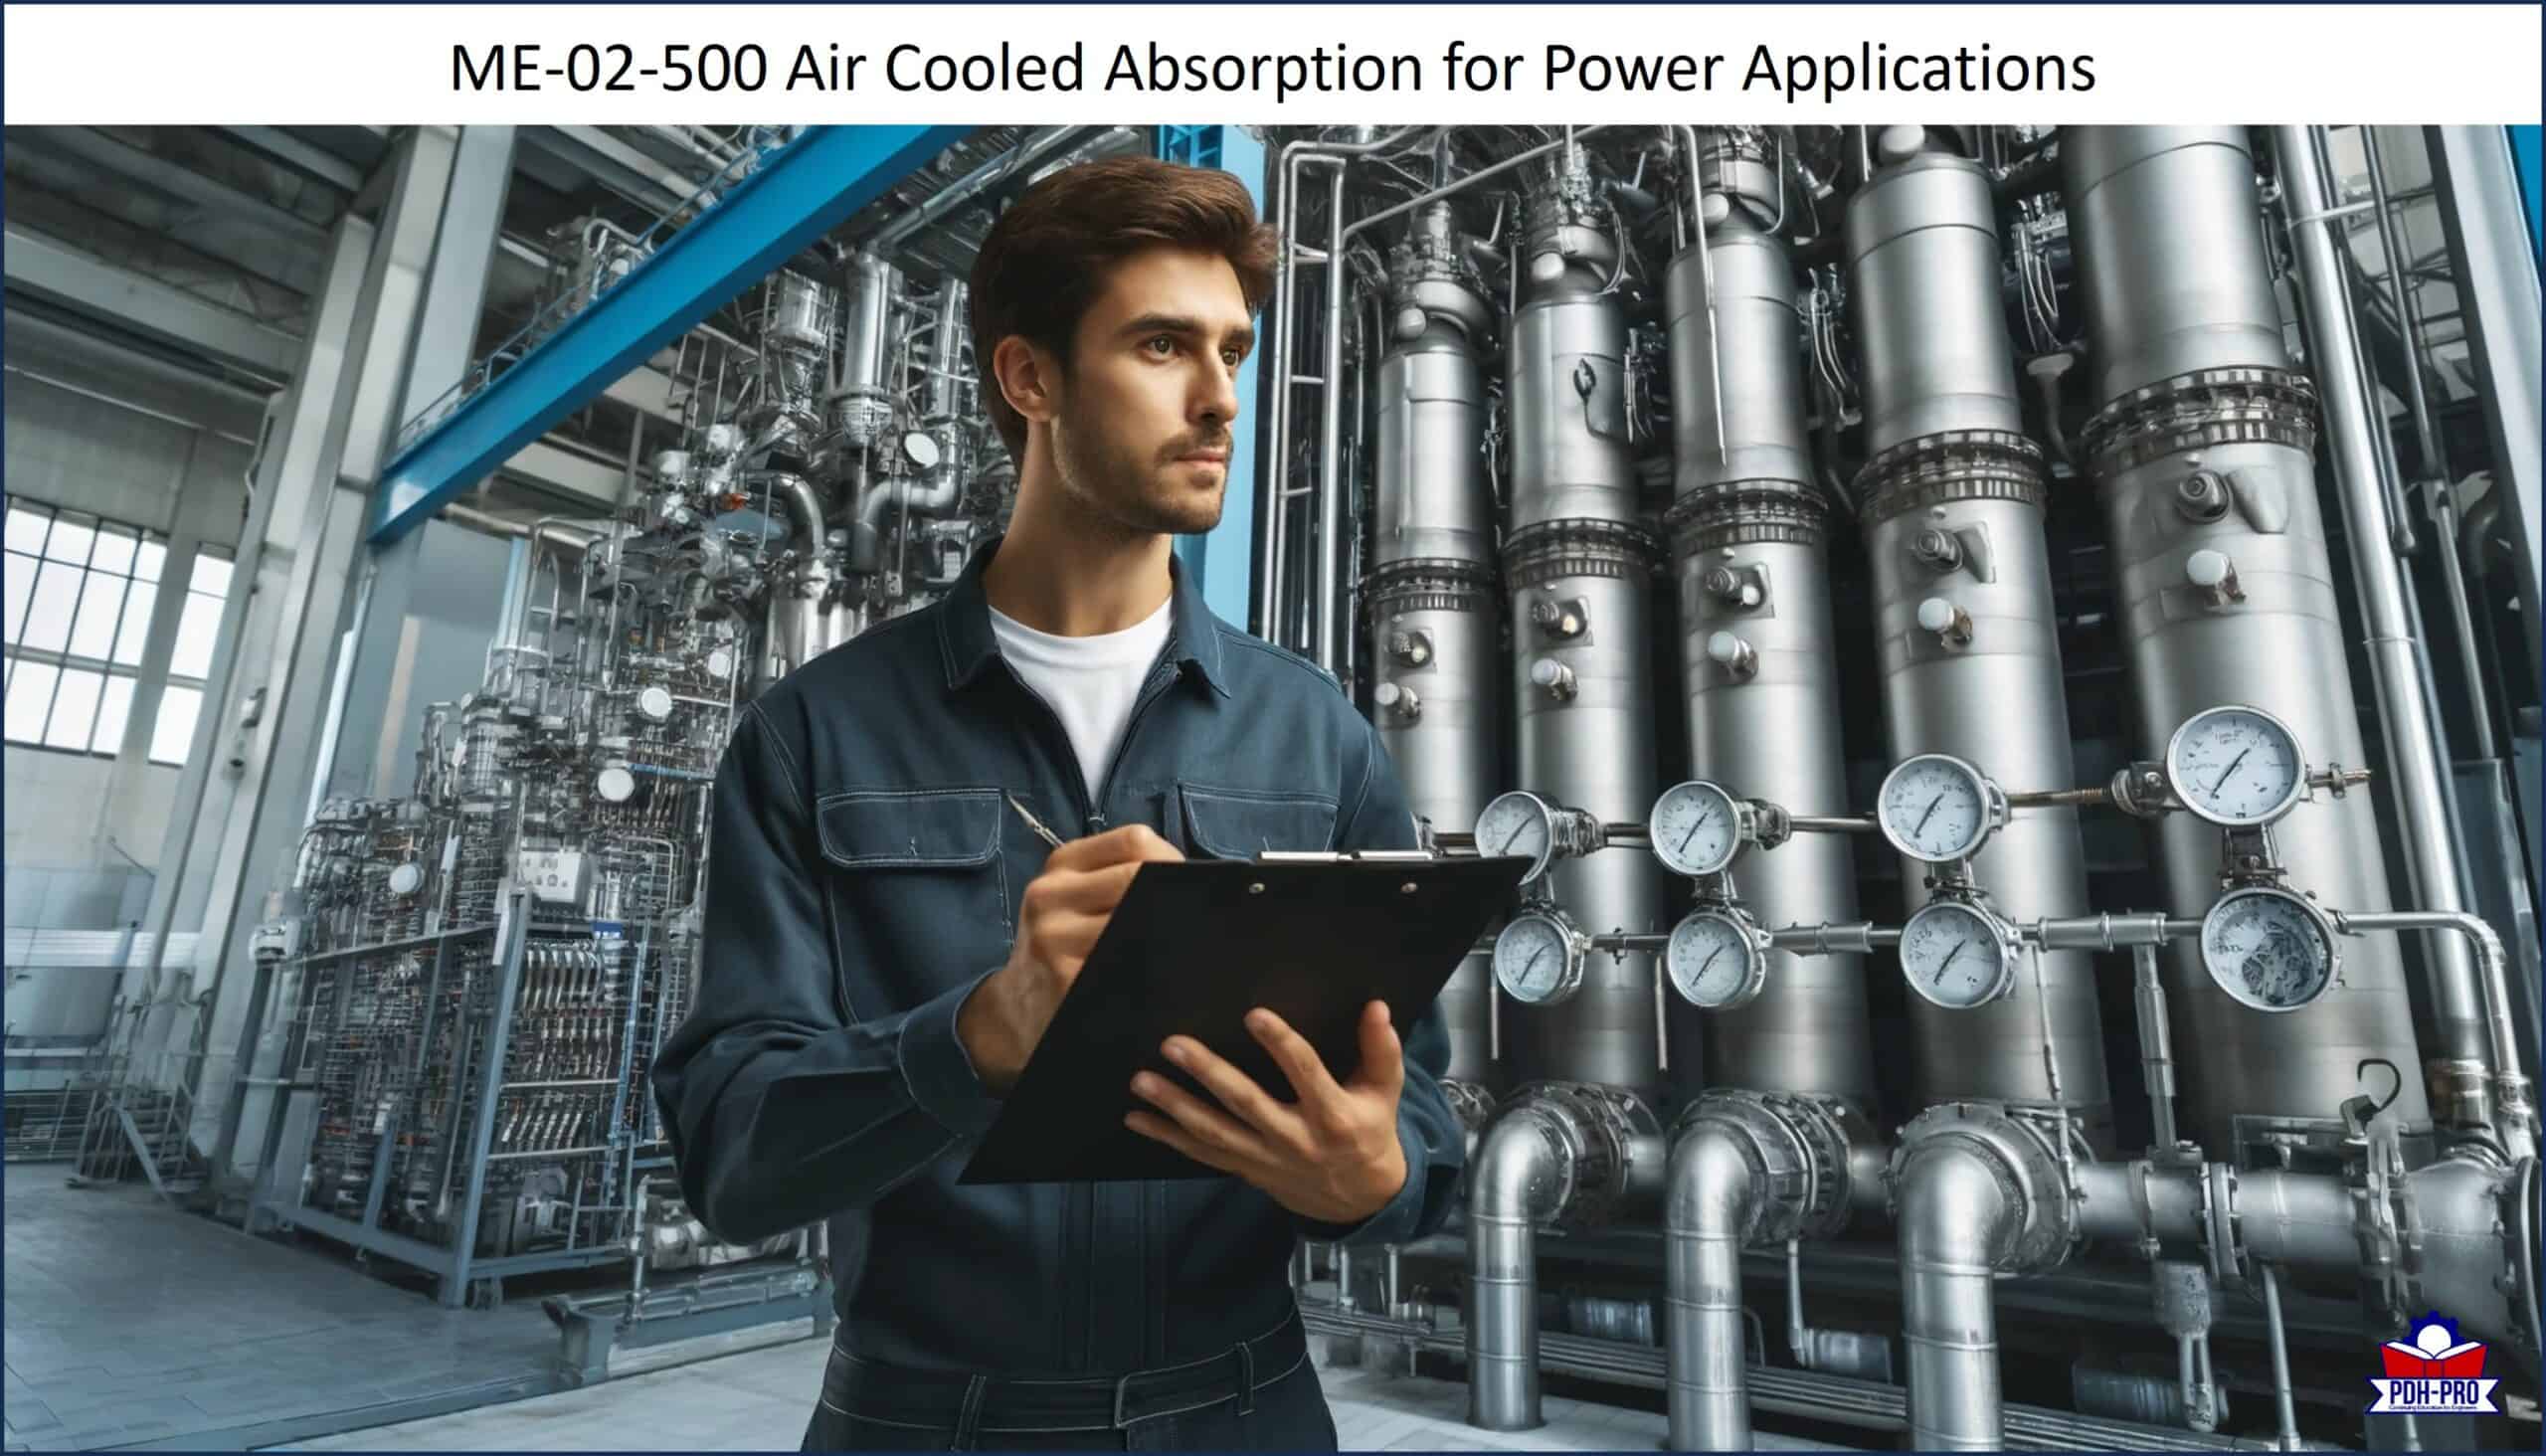 Air Cooled Absorption for Power Applications